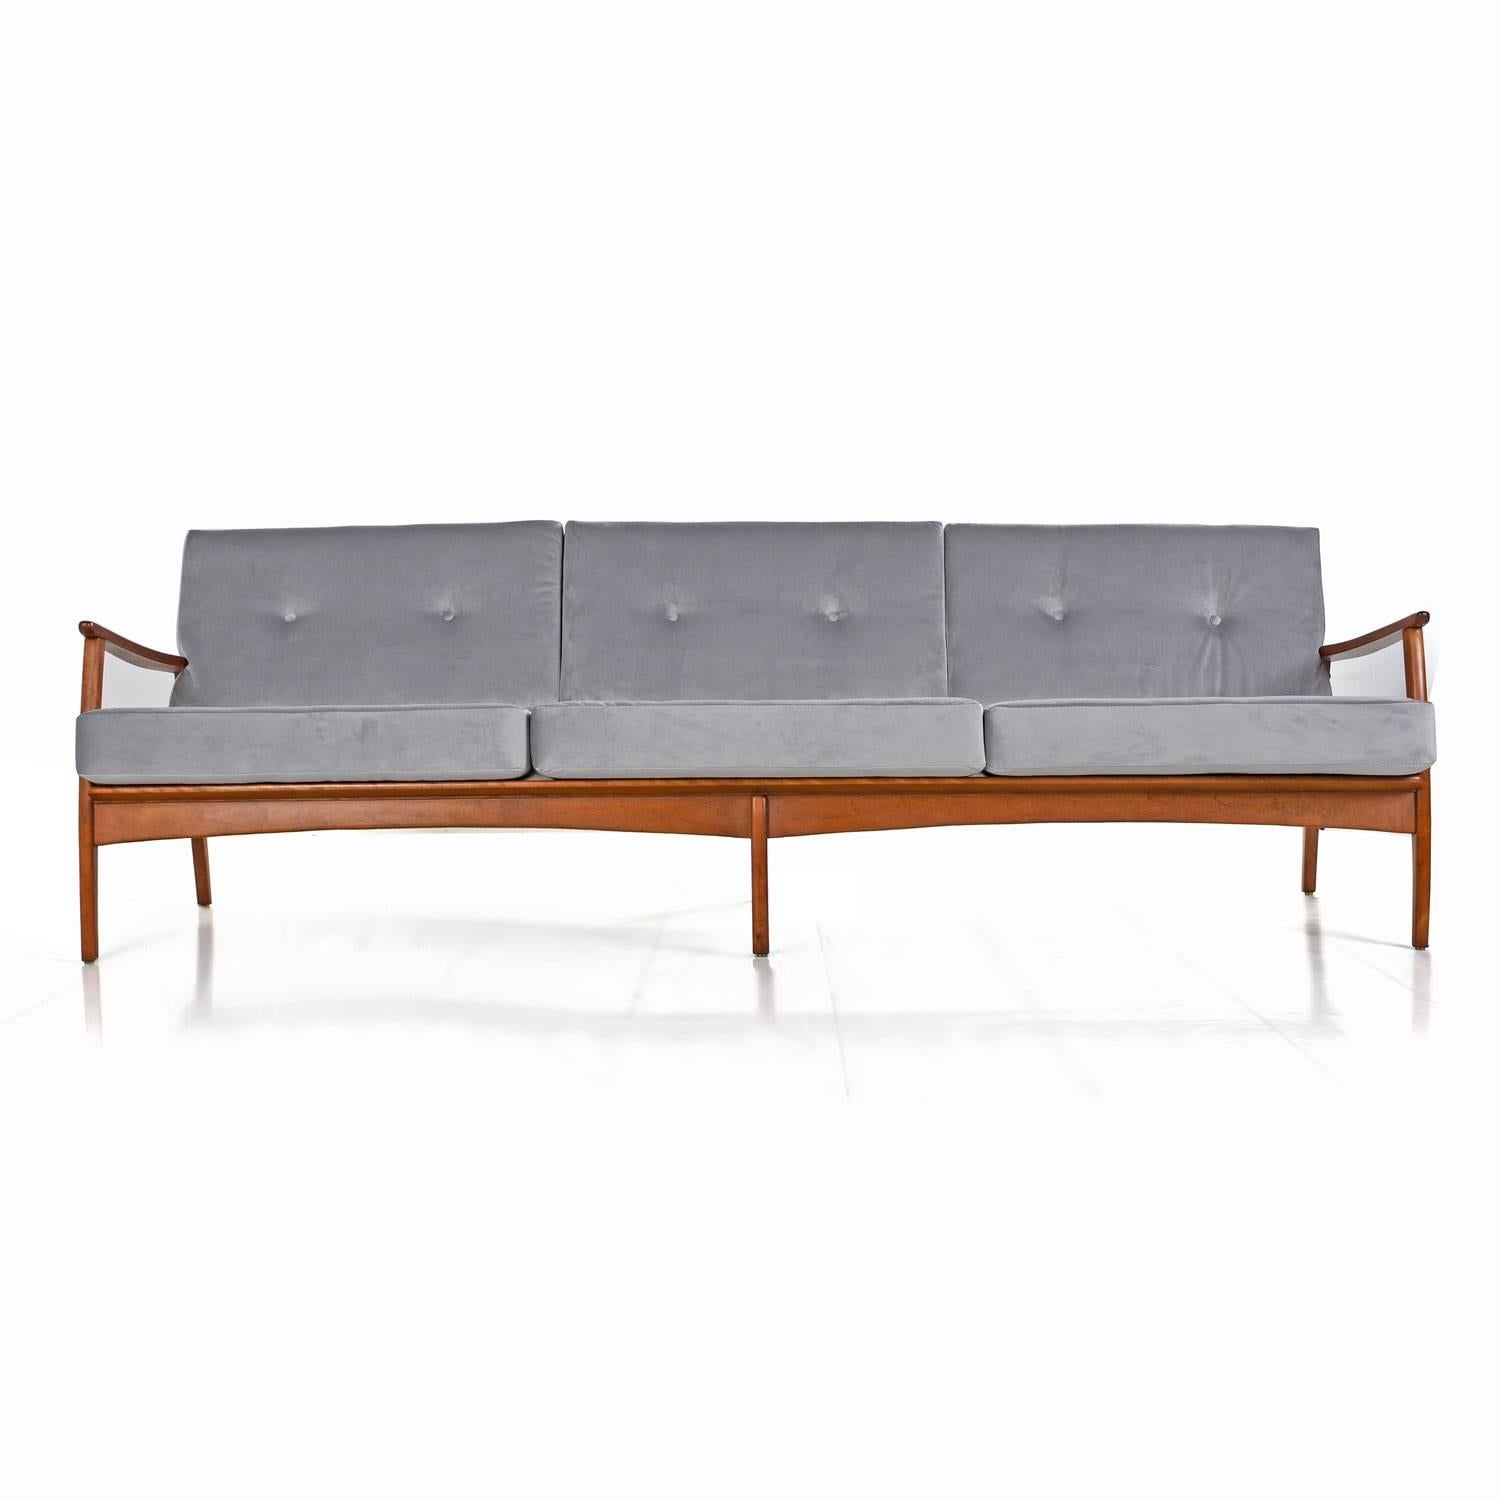 Retro Eames era sofa with Danish modern styling. Note the remarkable subtle detailing in the wood frame. Angled back legs add visual dynamism. This angle gives a gentle reclined position to the couch, enhancing comfort. The wide, sculpted arms taper